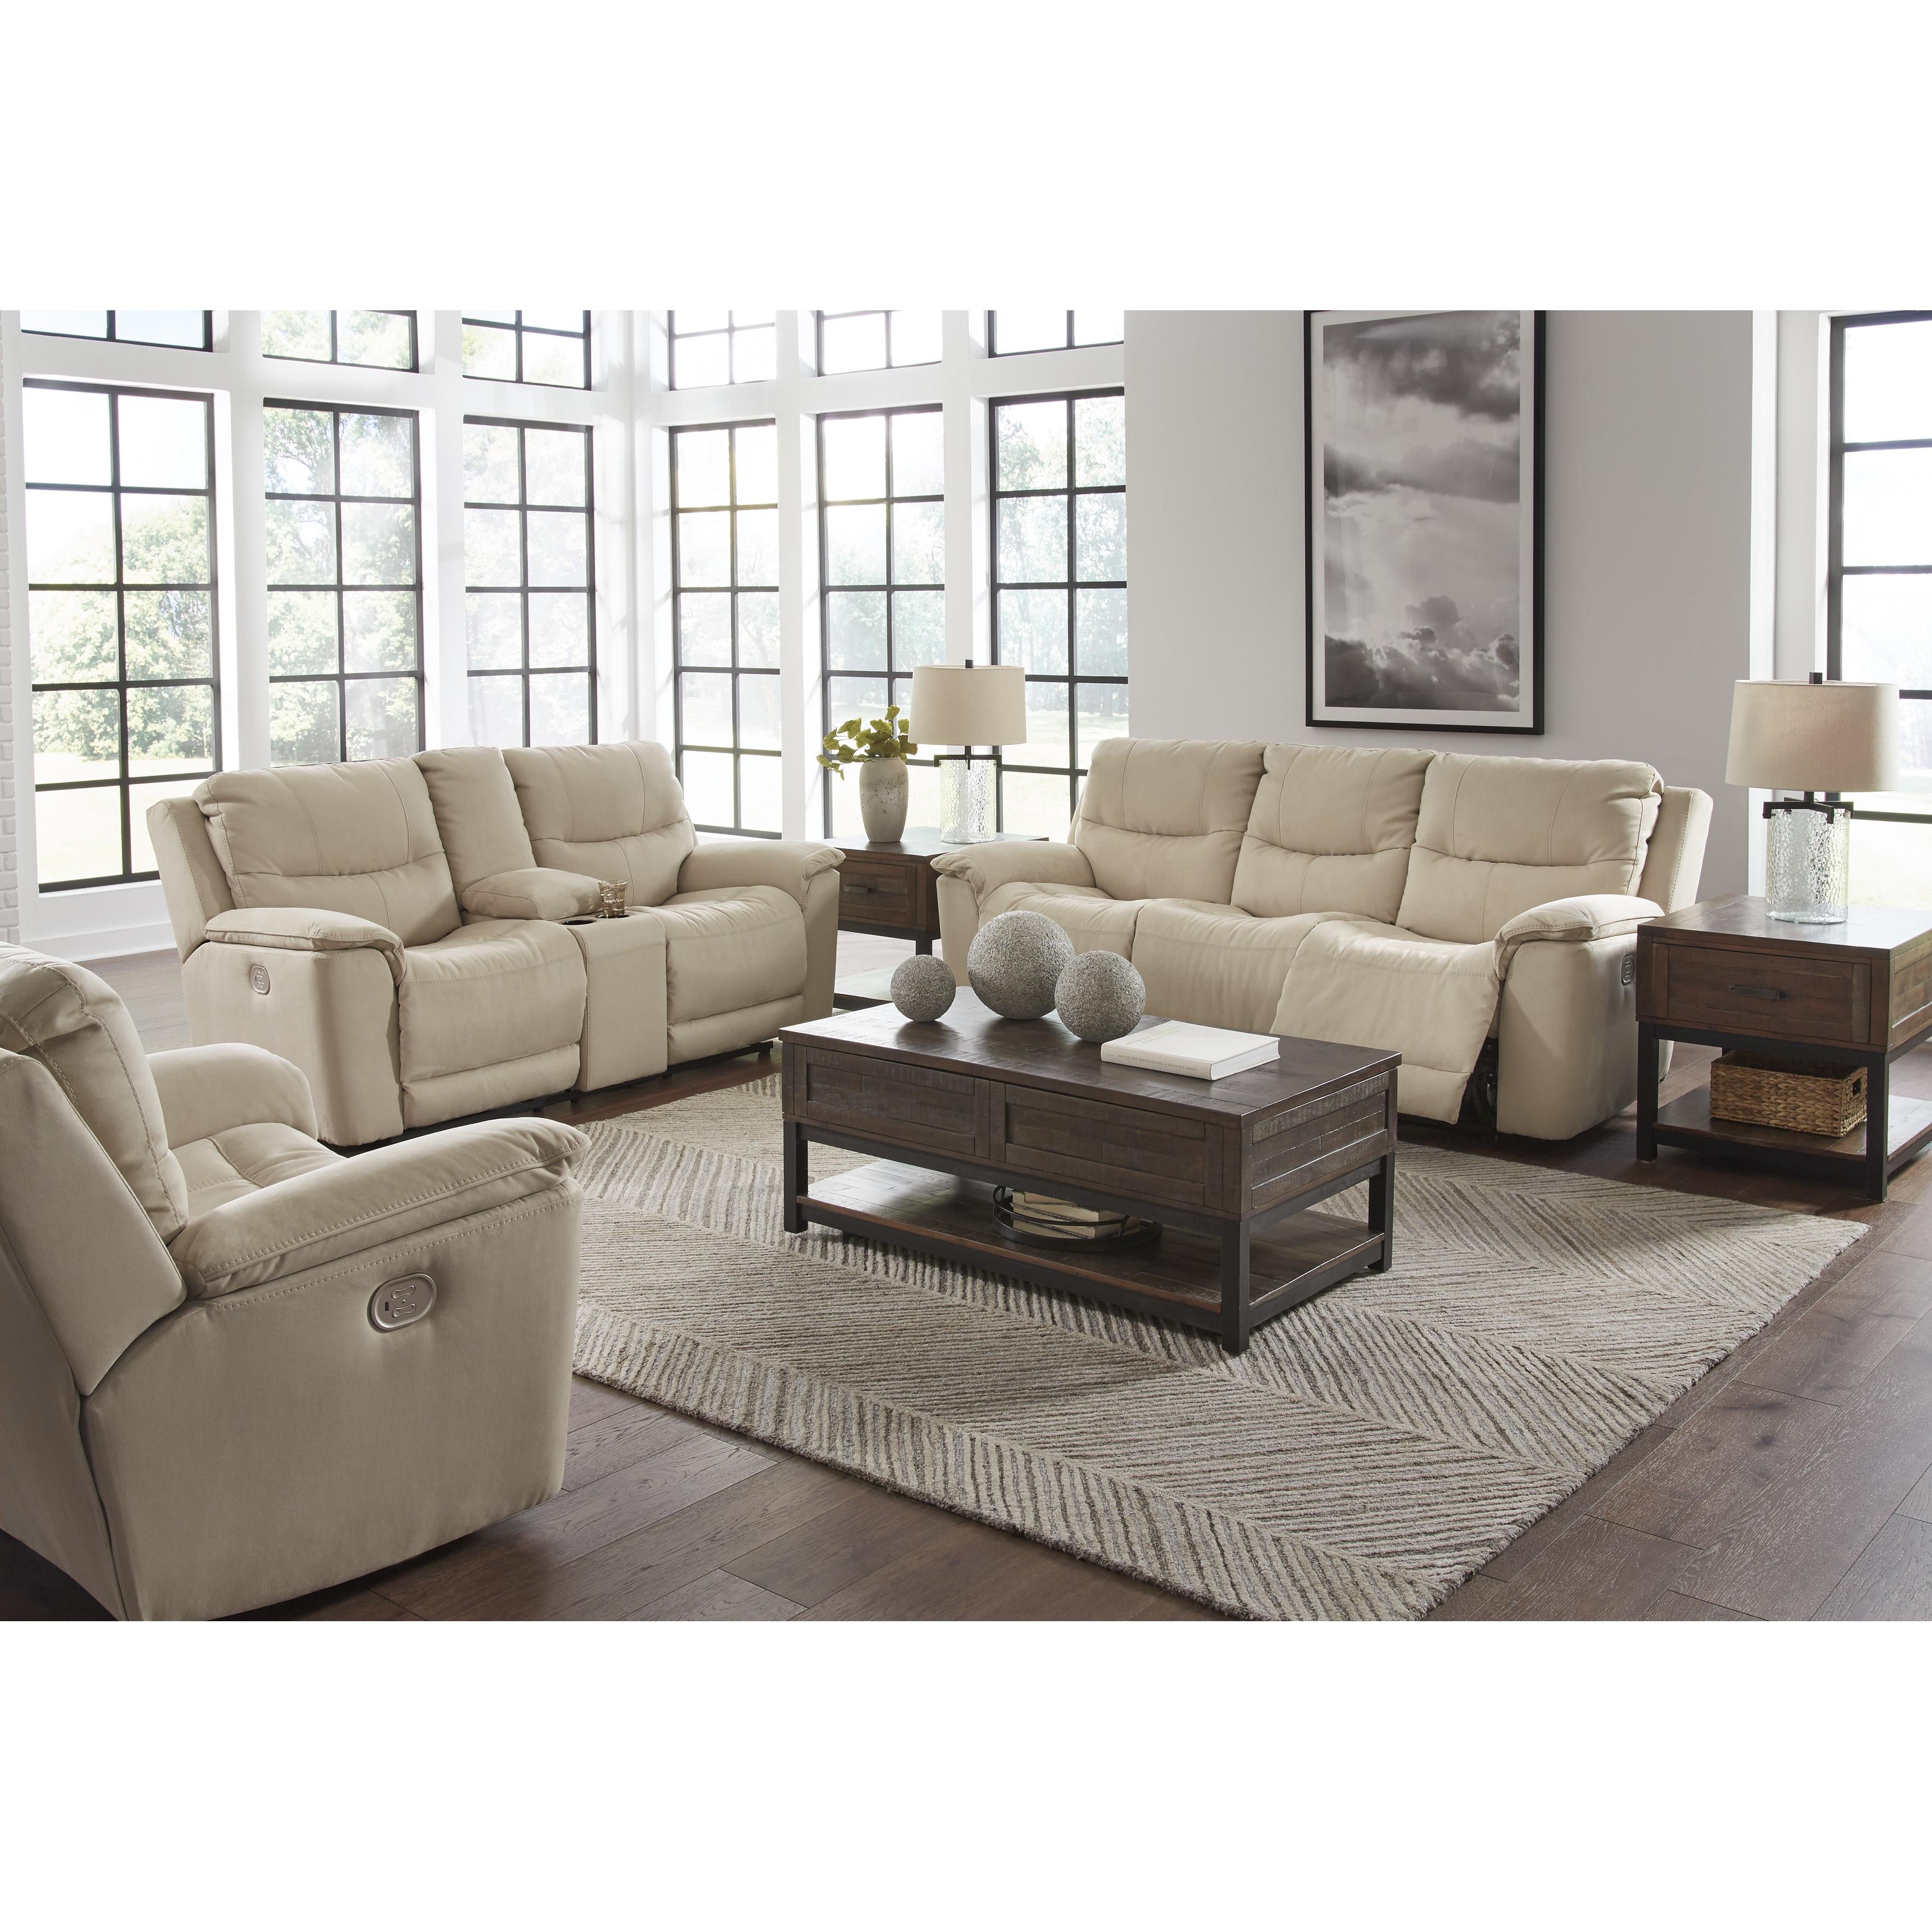 Signature Design by Ashley Next-Gen Gaucho Power Reclining Leather Look Sofa 6080715 IMAGE 13